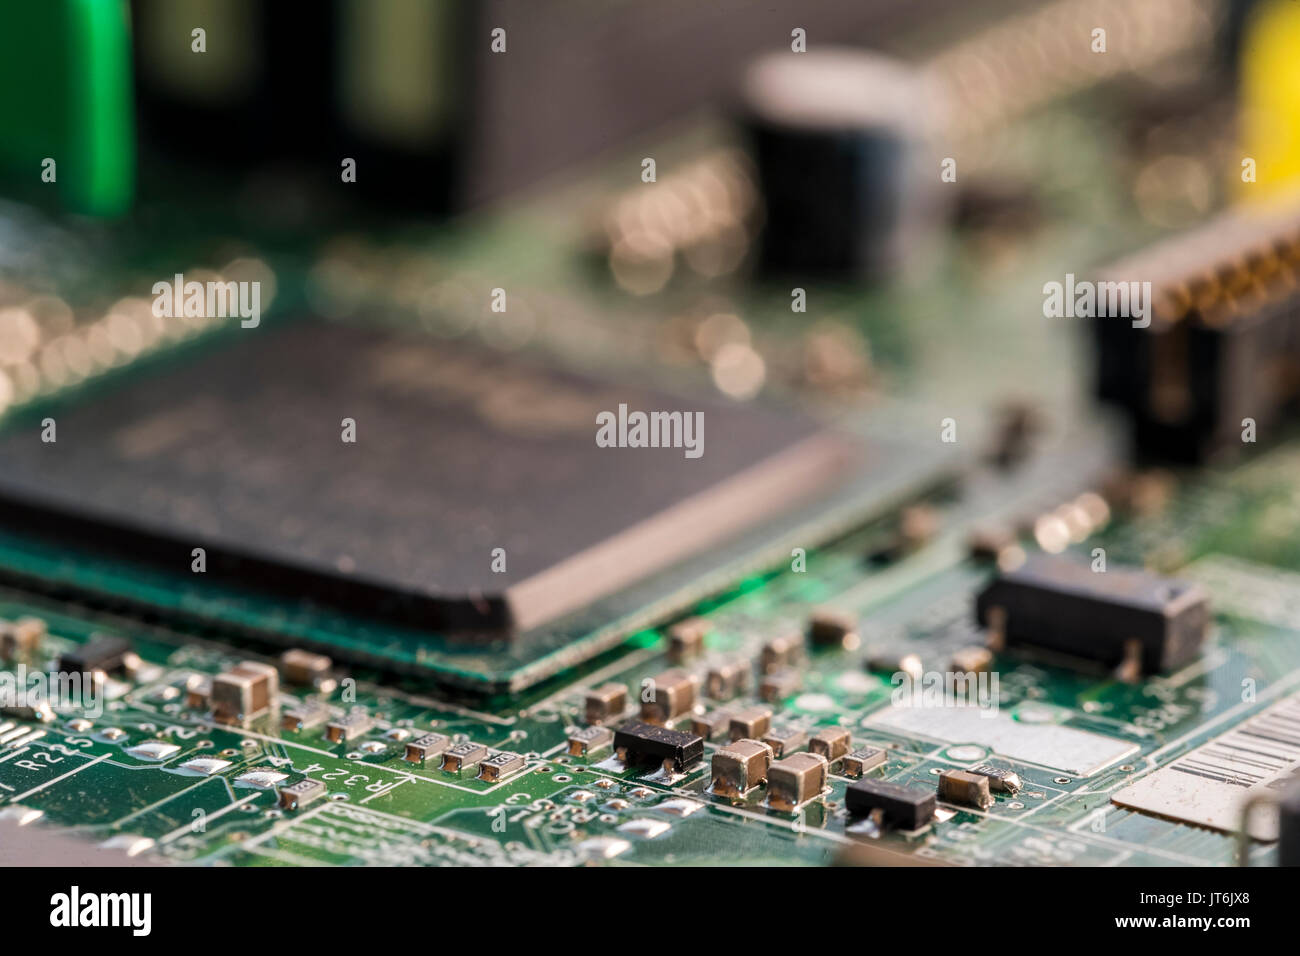 Computer components. Technology. Stock Photo